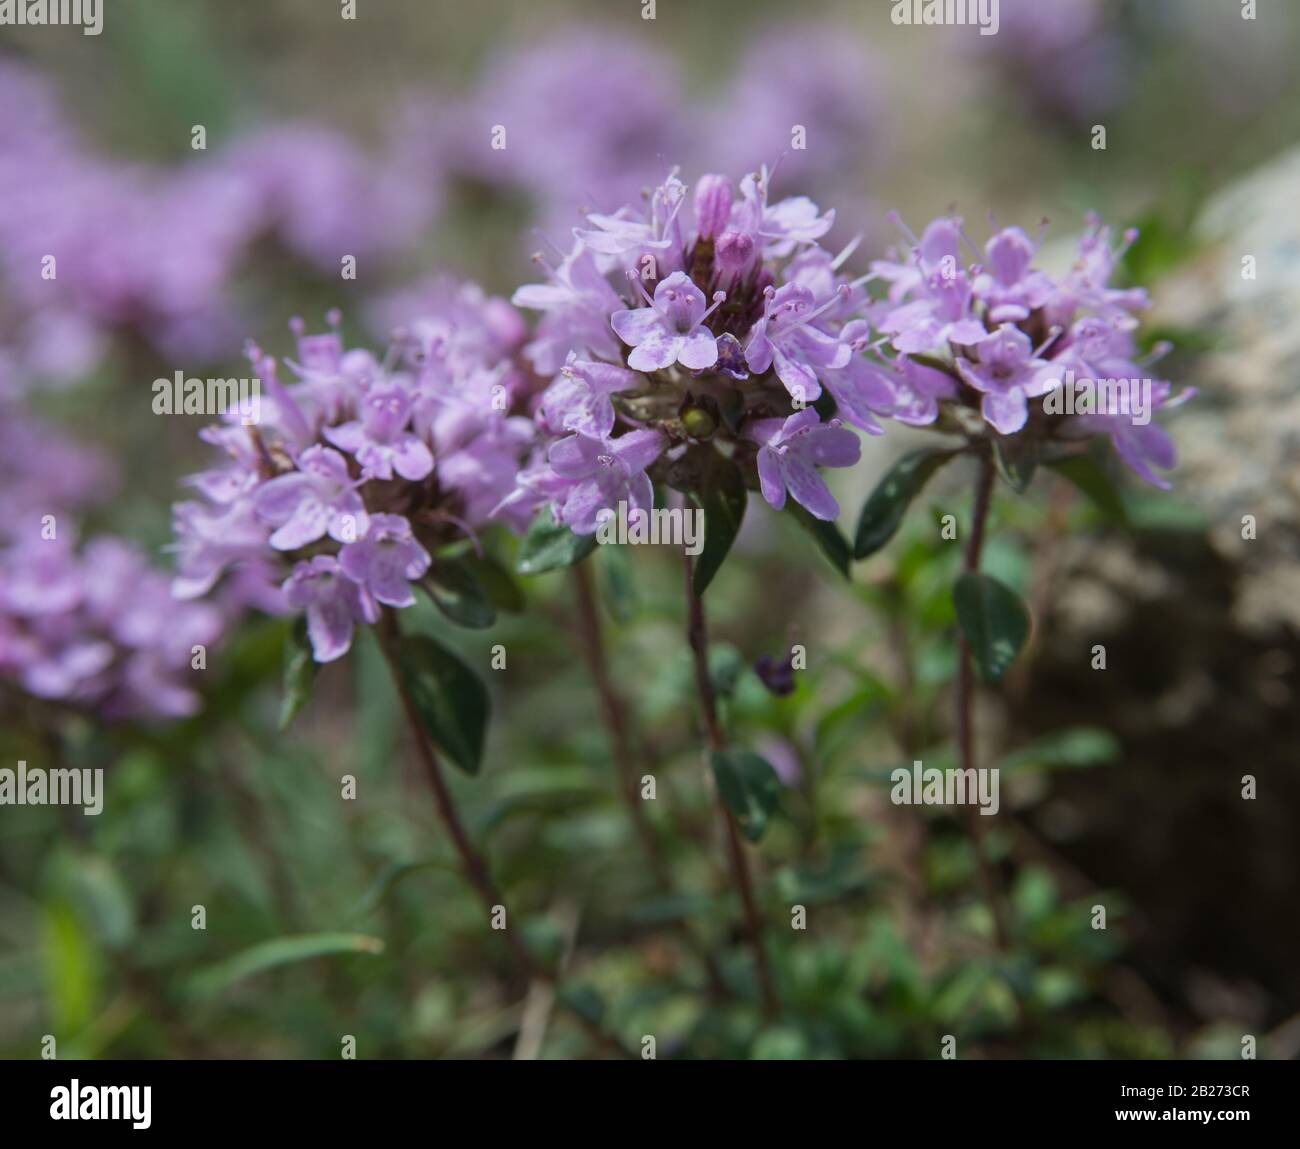 Thyme blossom. Thyme is any of several species of culinary and medicinal herbs of the genus Thymus, most commonly Thymus vulgaris. Stock Photo